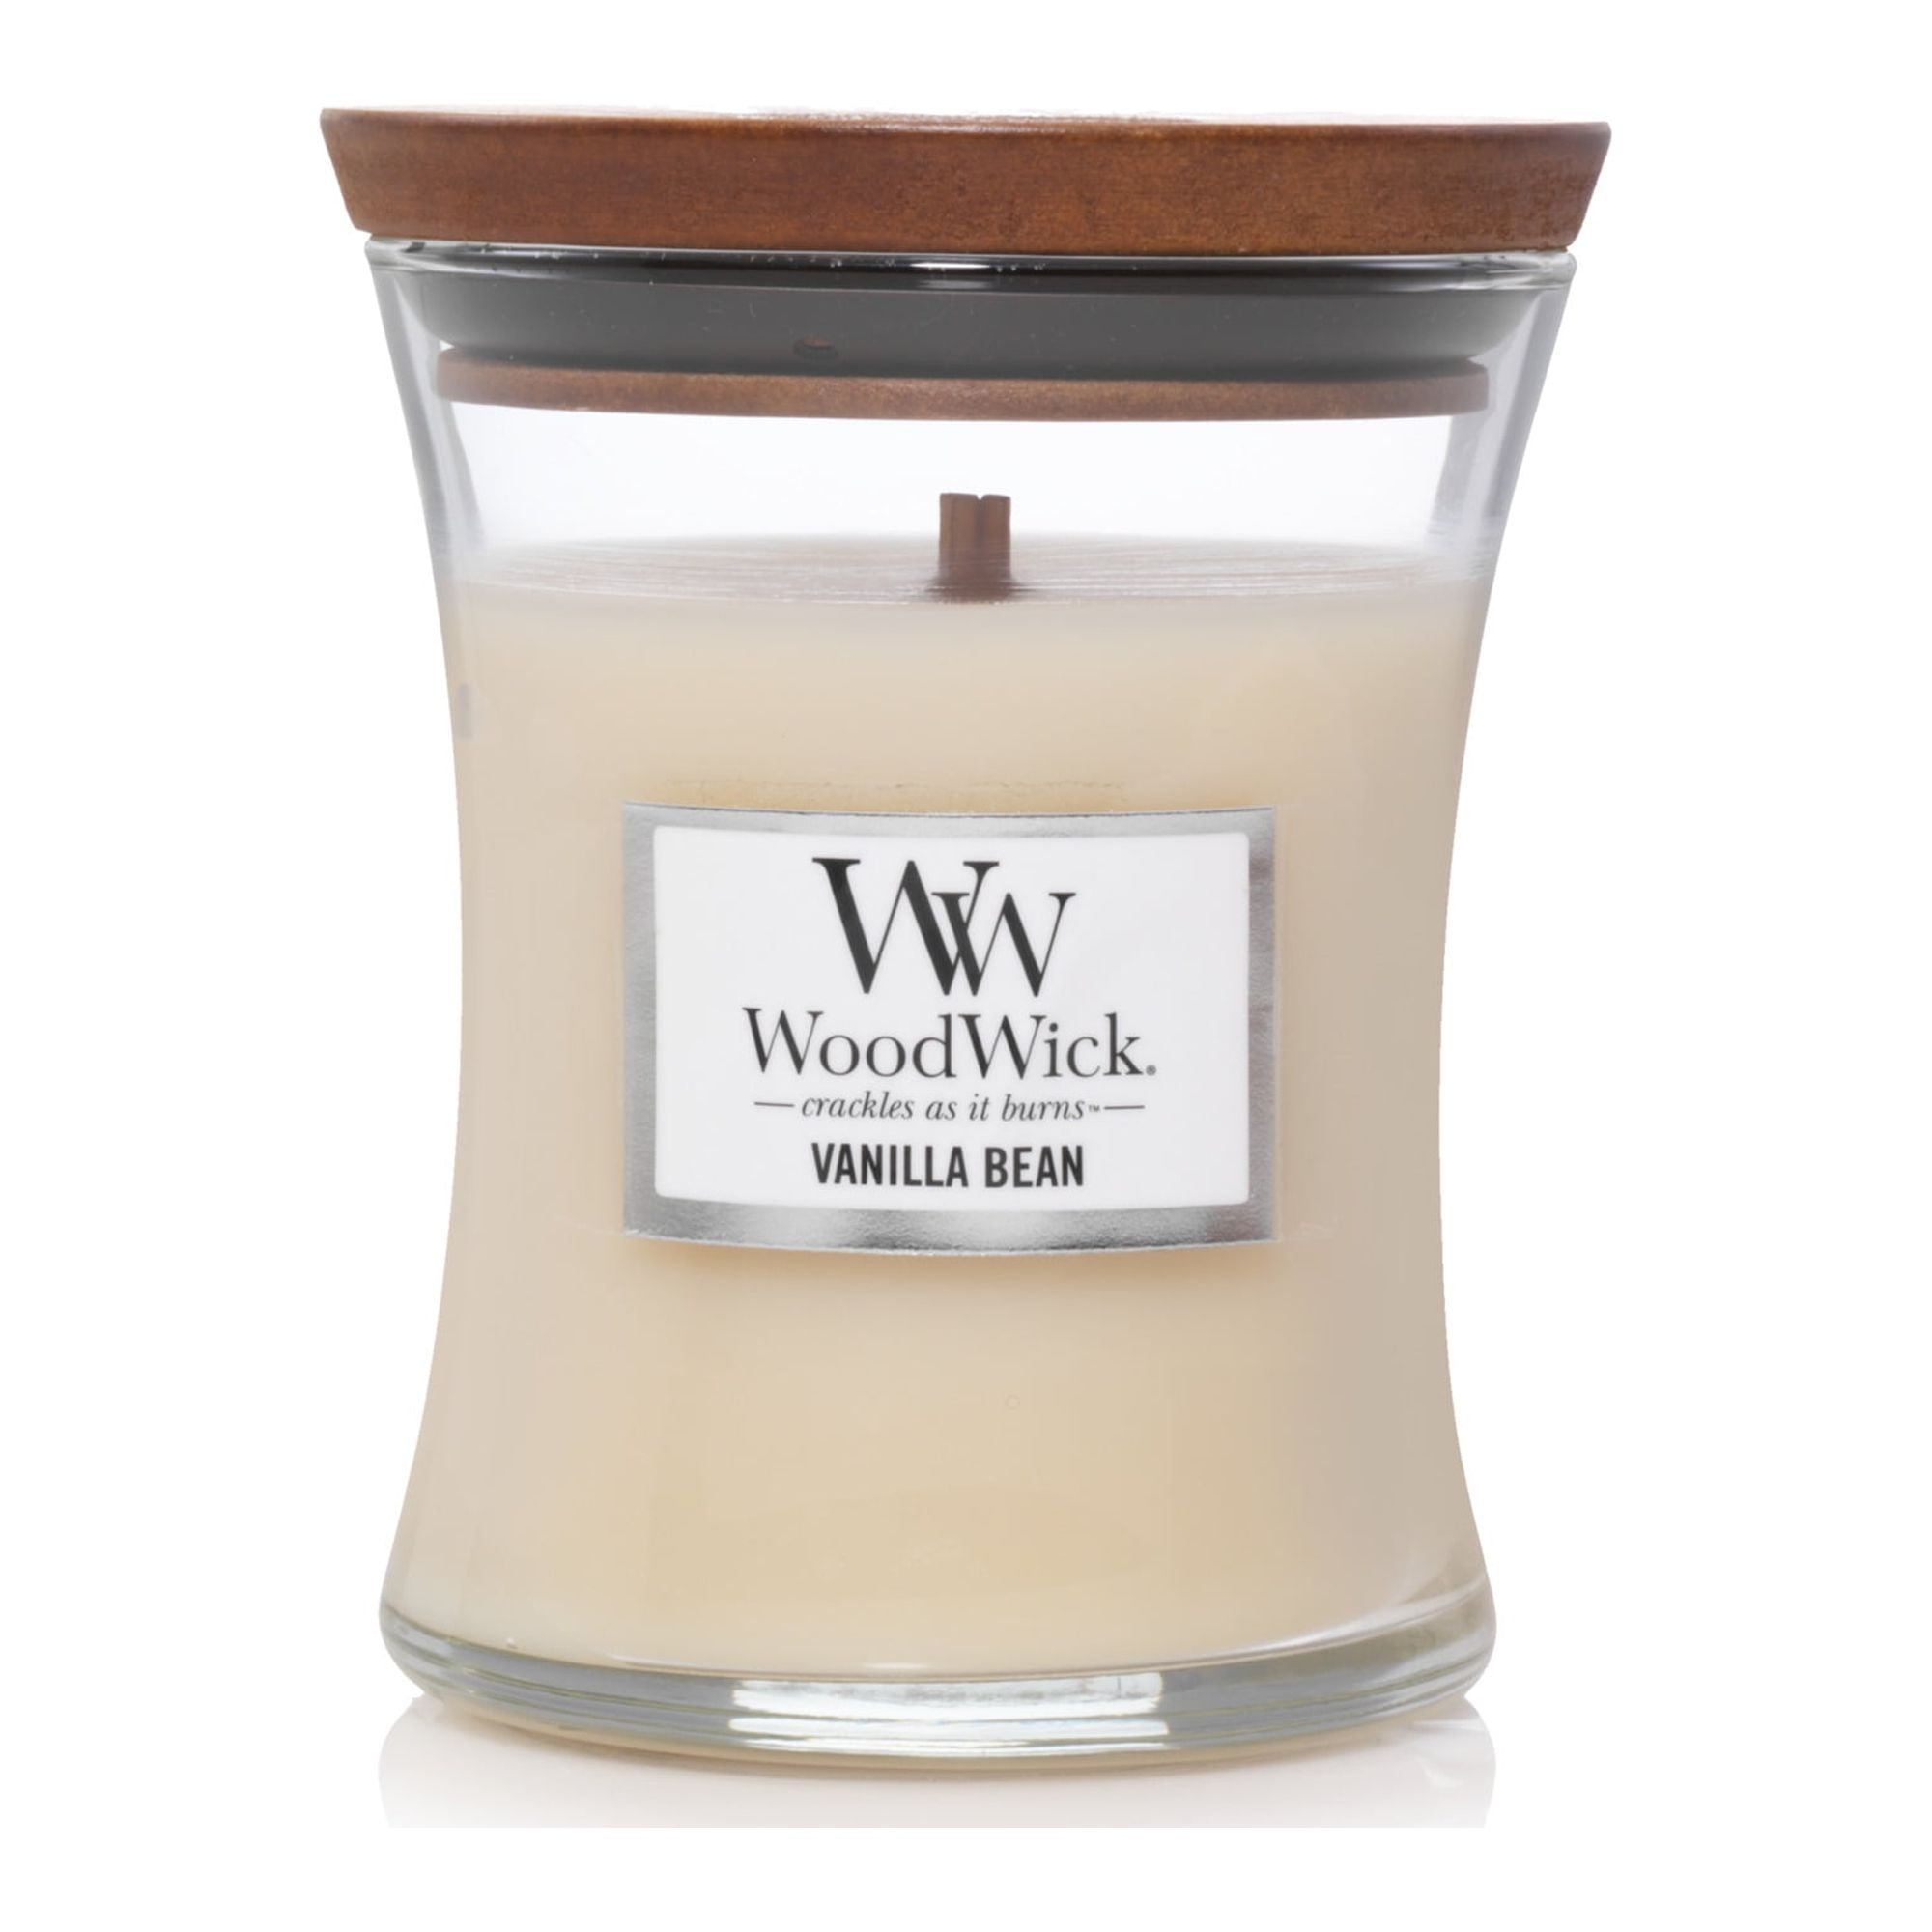  WoodWick Large Hourglass Candle, Redwood - Premium Soy Blend  Wax, Pluswick Innovation Wood Wick, Made in USA : Home & Kitchen